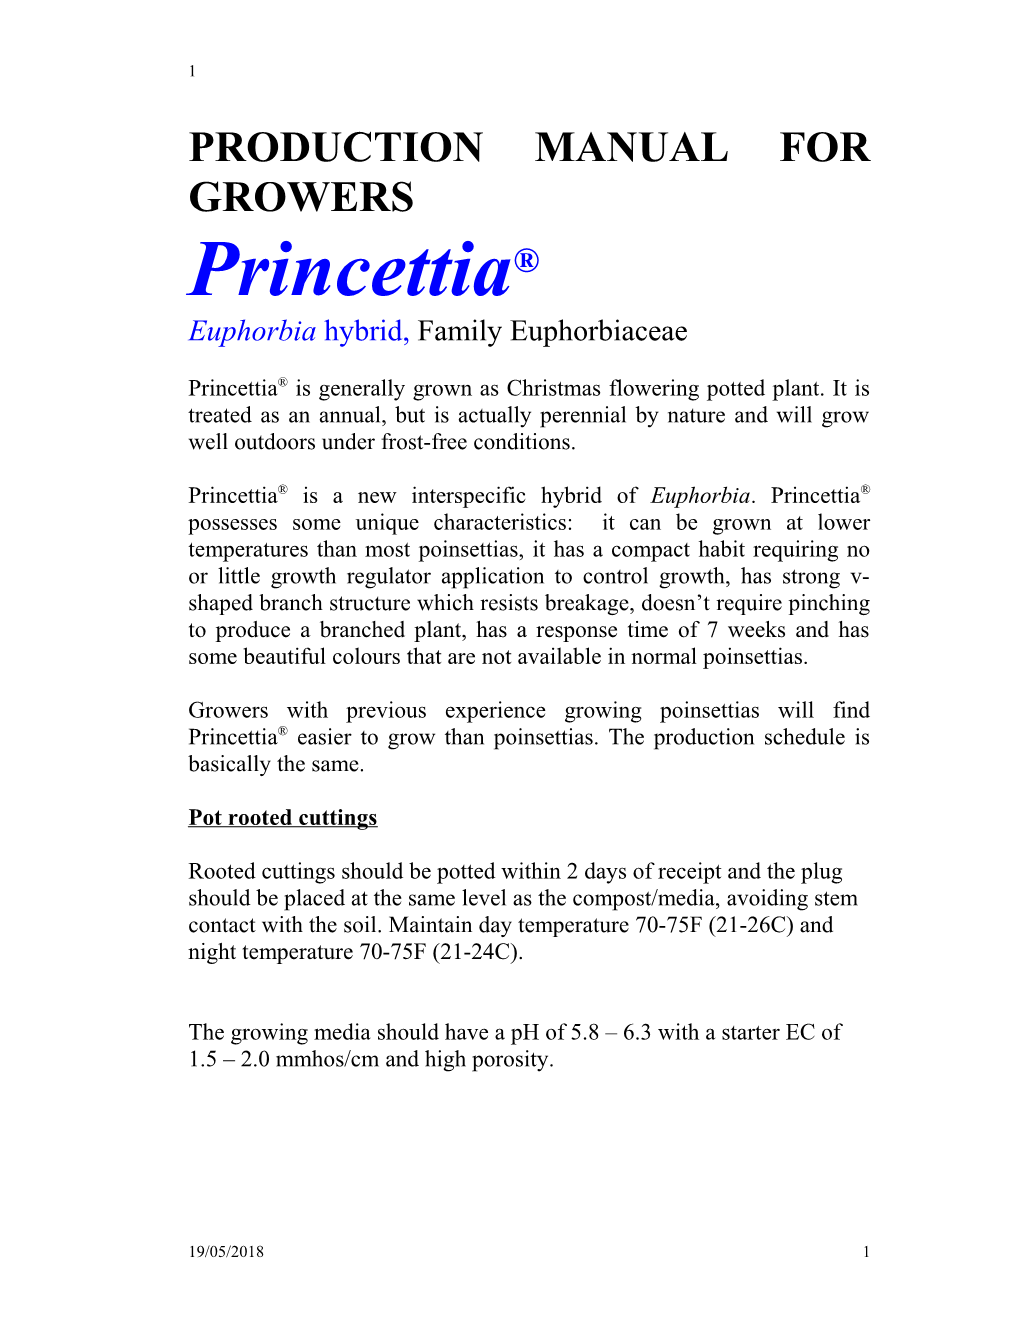 Production Manual for Growers